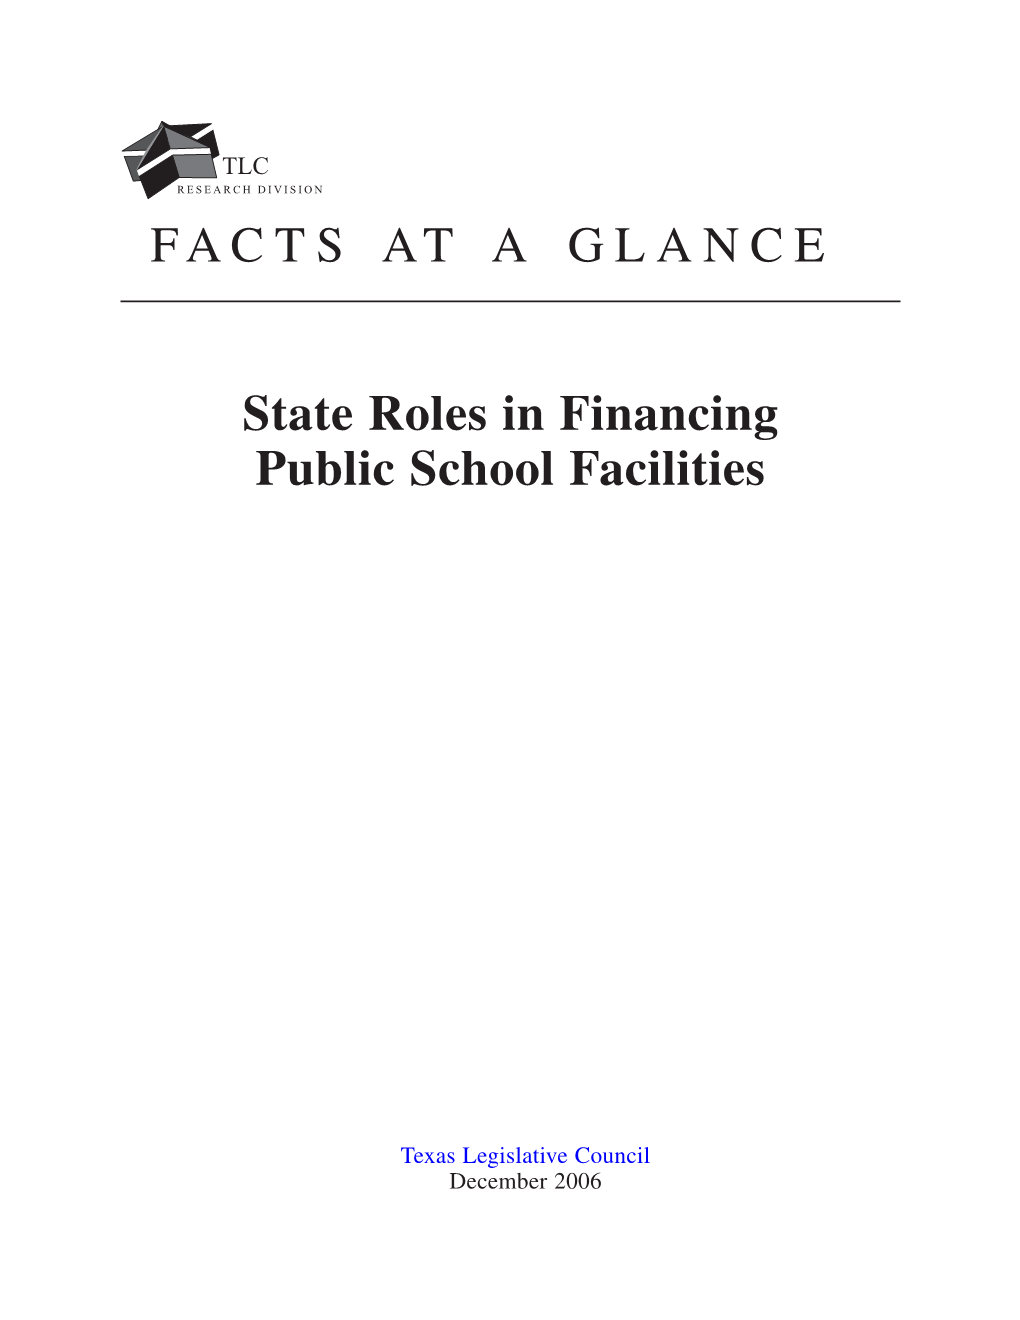 FACTS at a GLANCE State Roles in Financing Public School Facilities